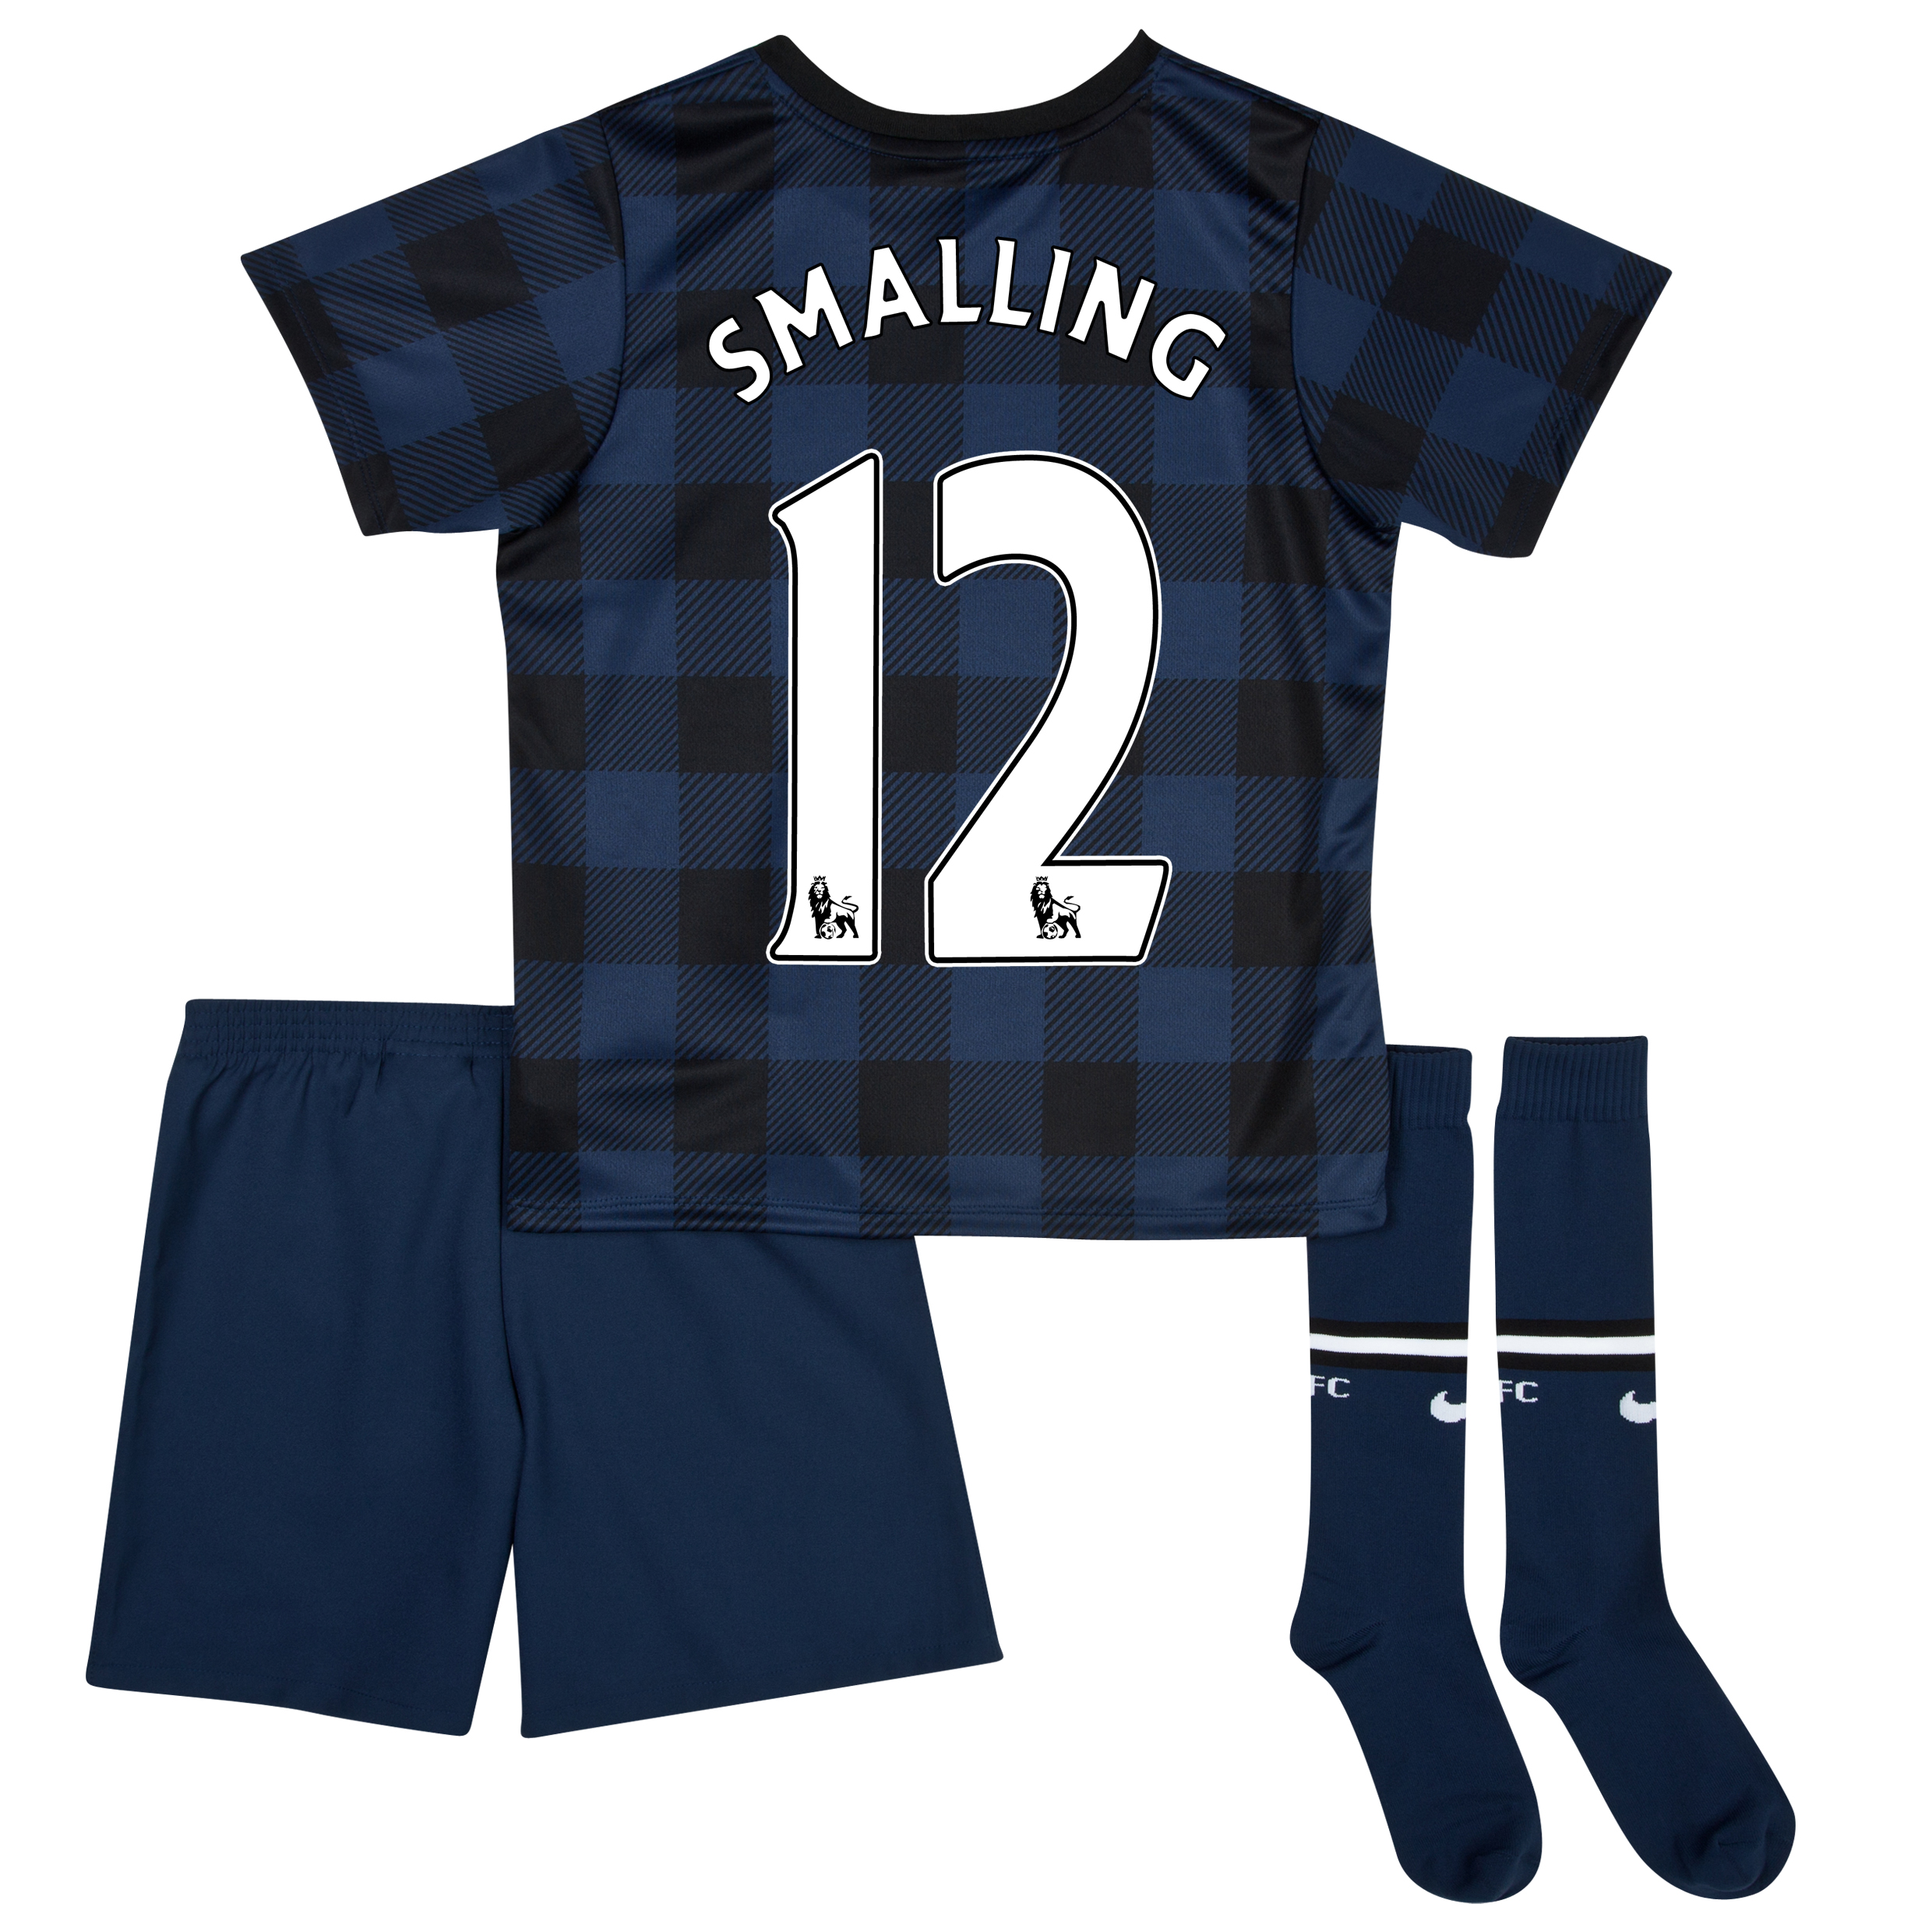 Manchester United Away Kit 2013/14 - Little Boys with Smalling 12 printing